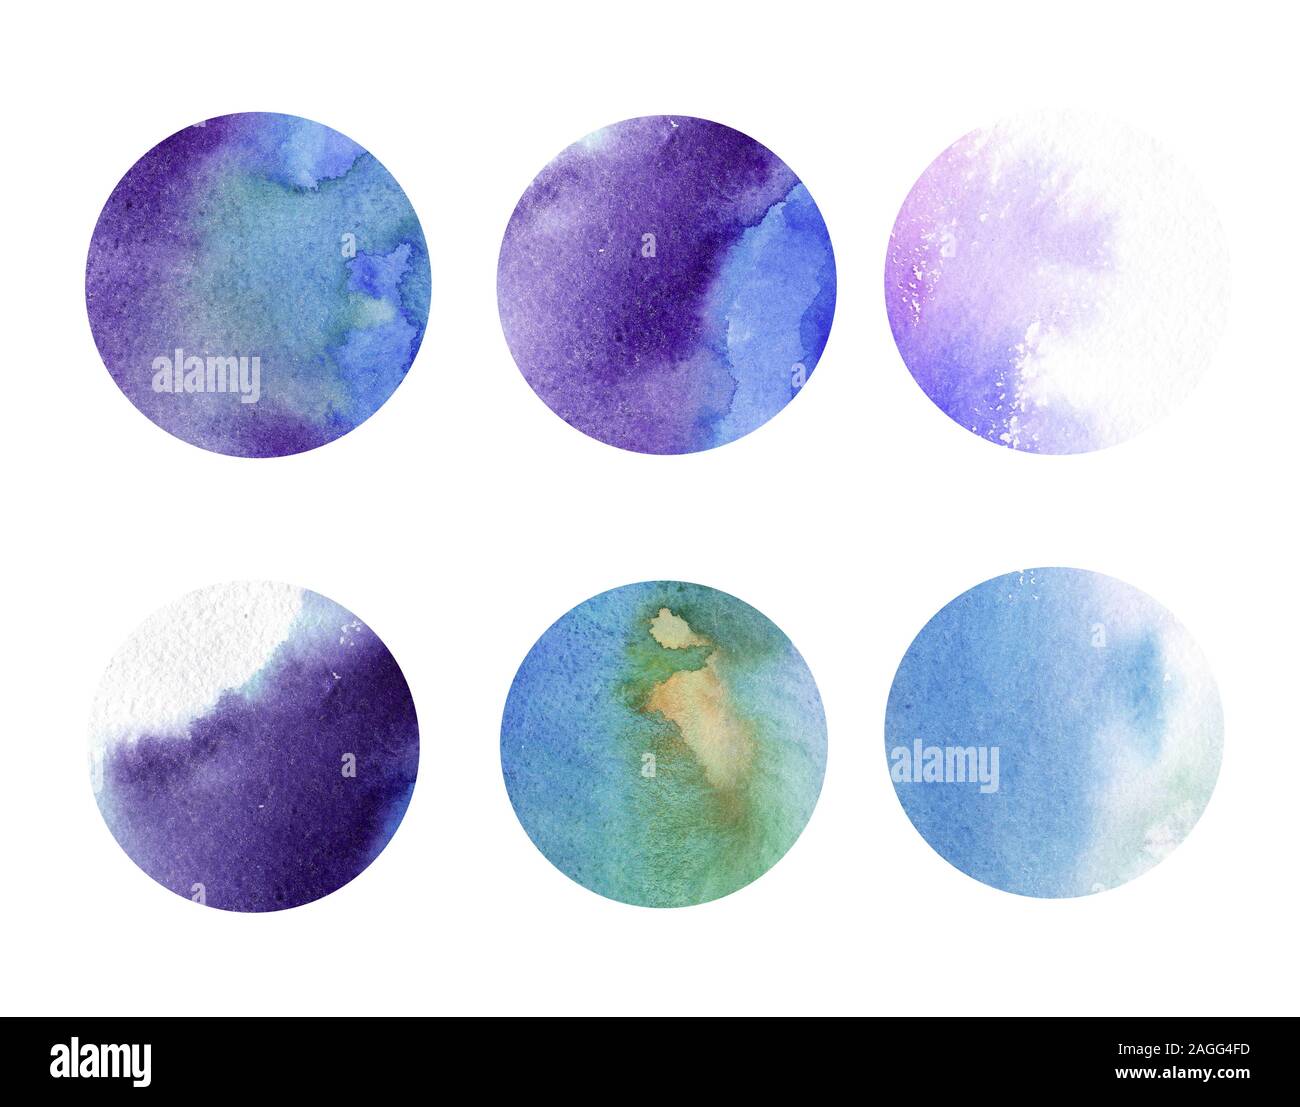 Watercolor set of circles. Hand painted abstract texture backgrounds. Hand drawn illustration. Round elements. Stock Photo